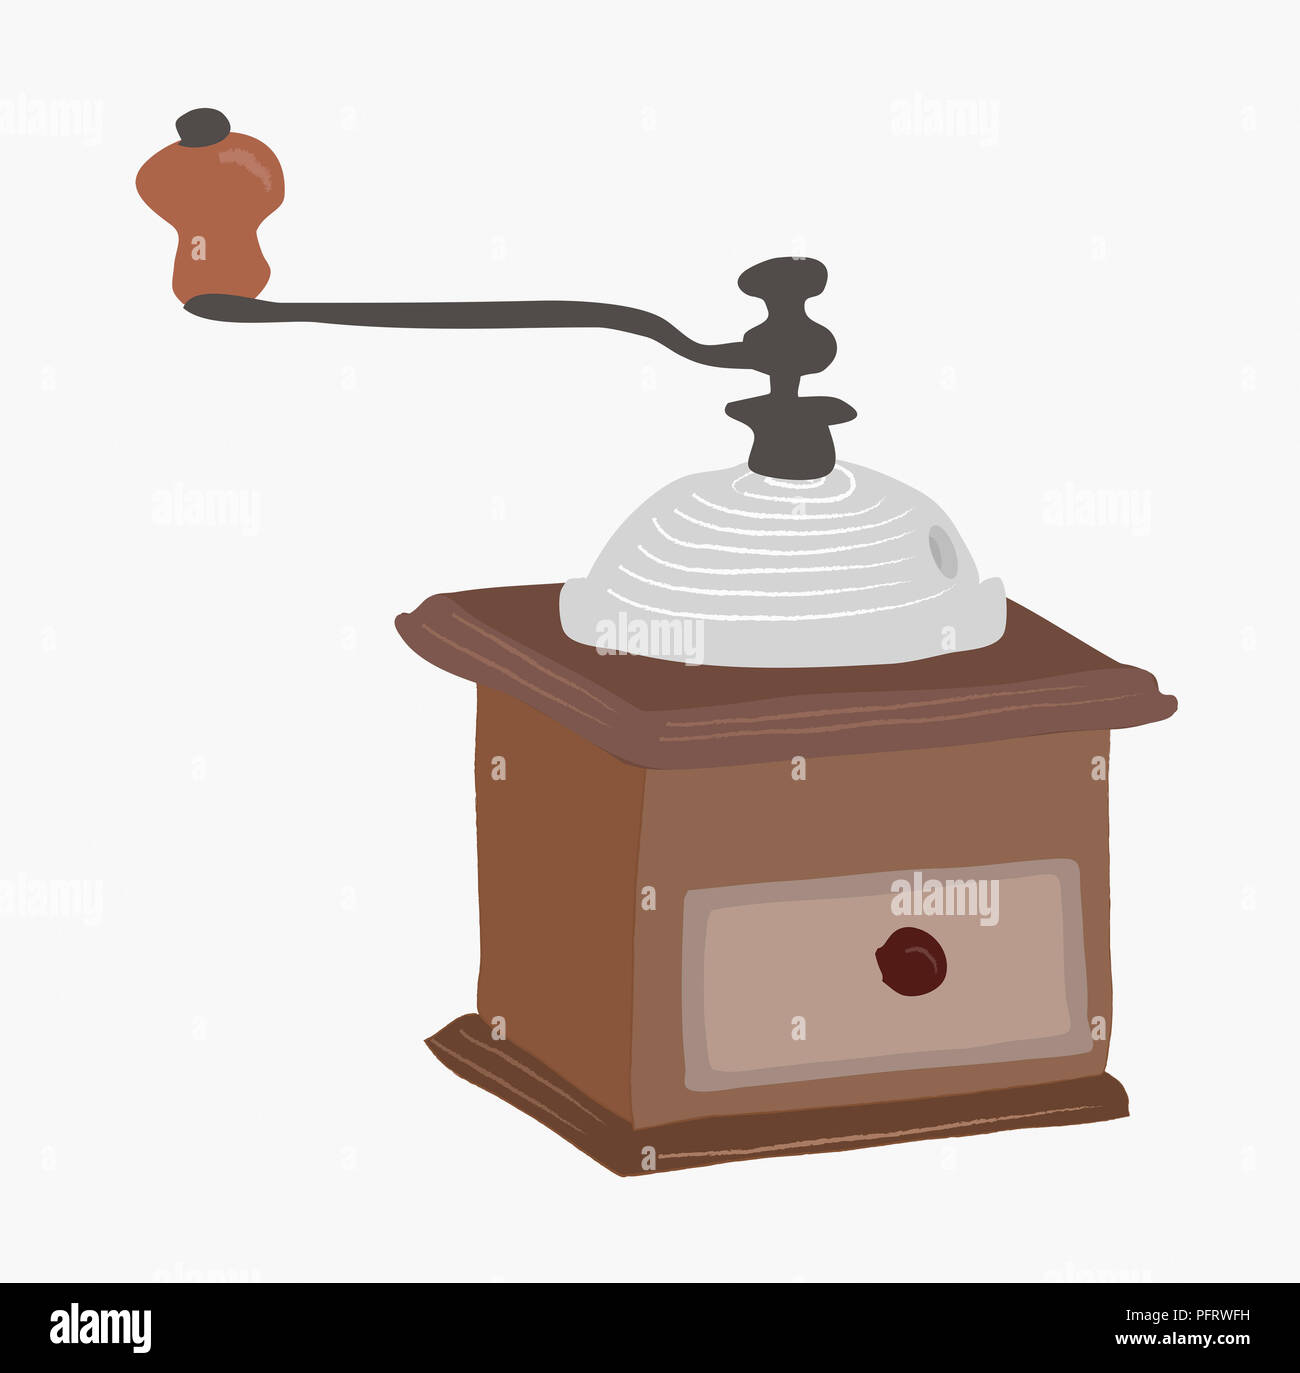 Illustration of a manual coffee grinder Stock Photo